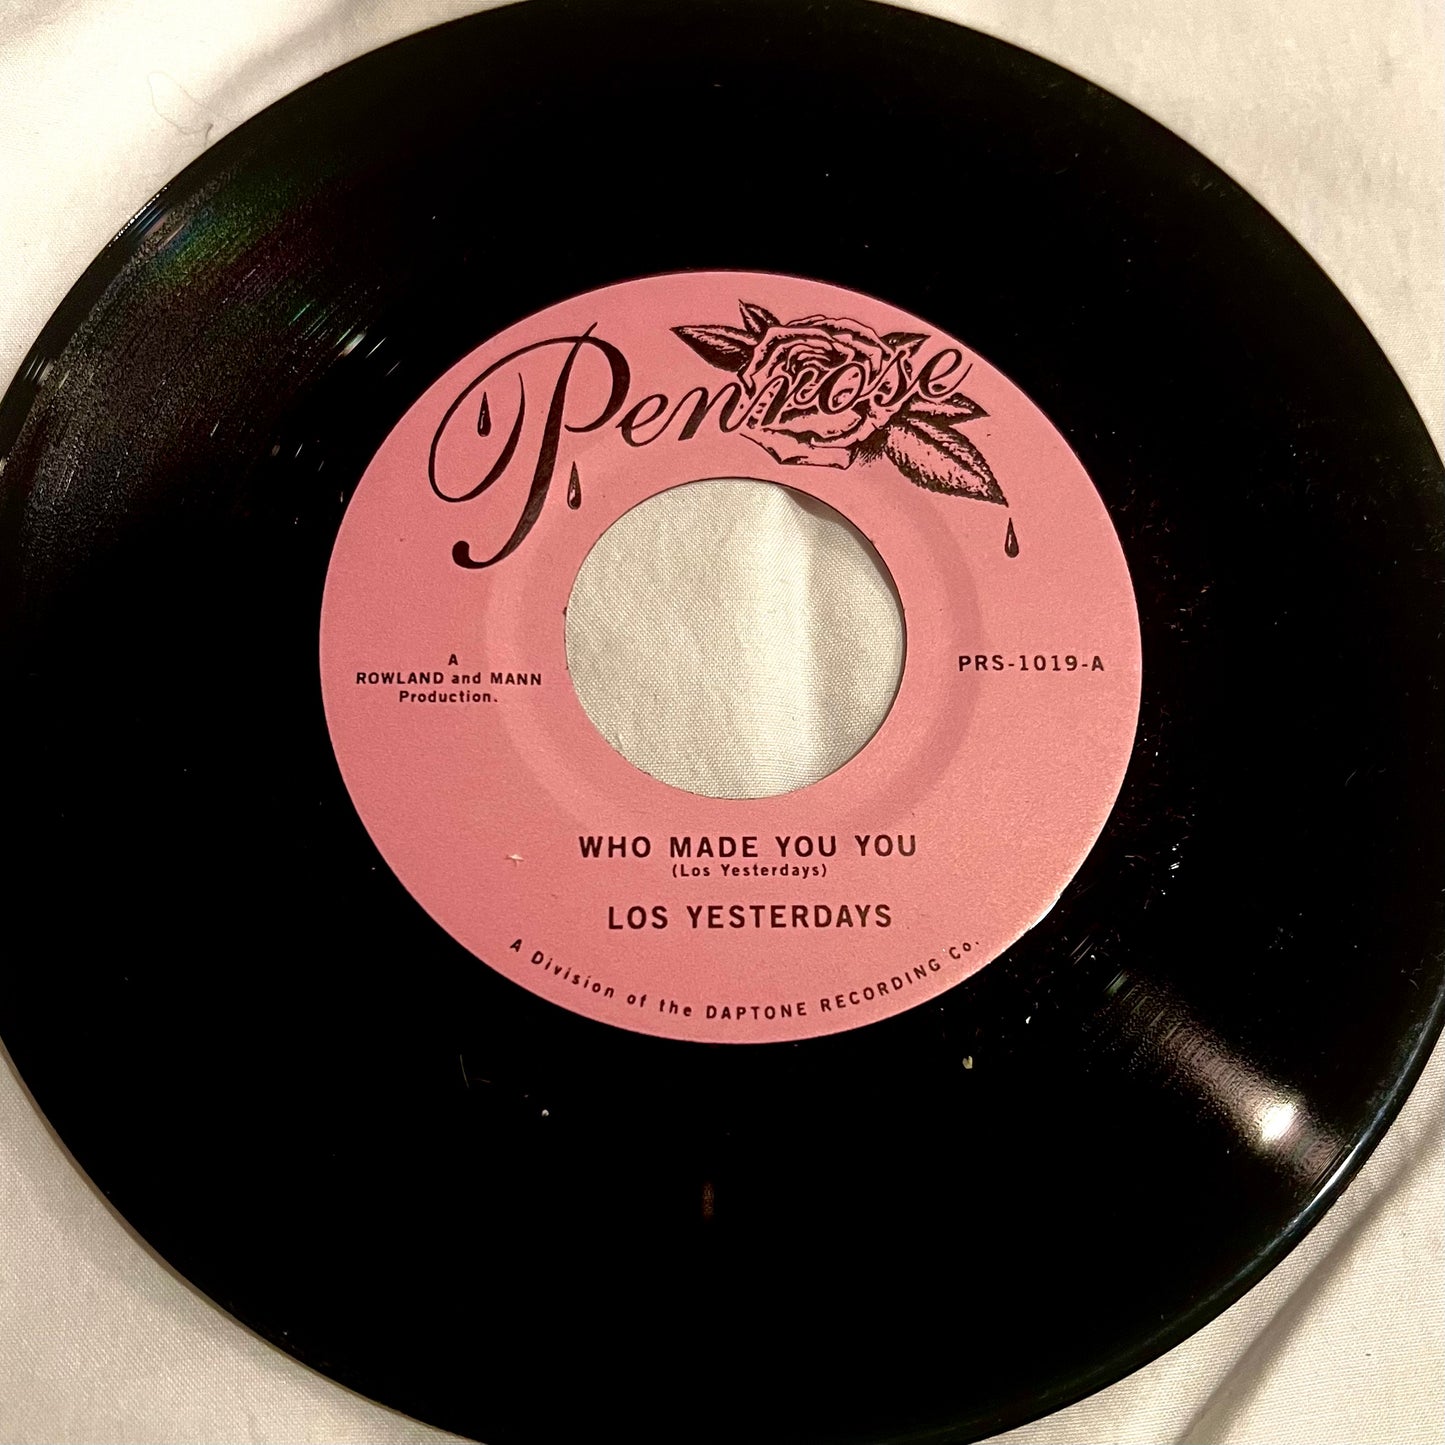 45 Record - Louie Louie Pink 7” - RARE and LIMITED